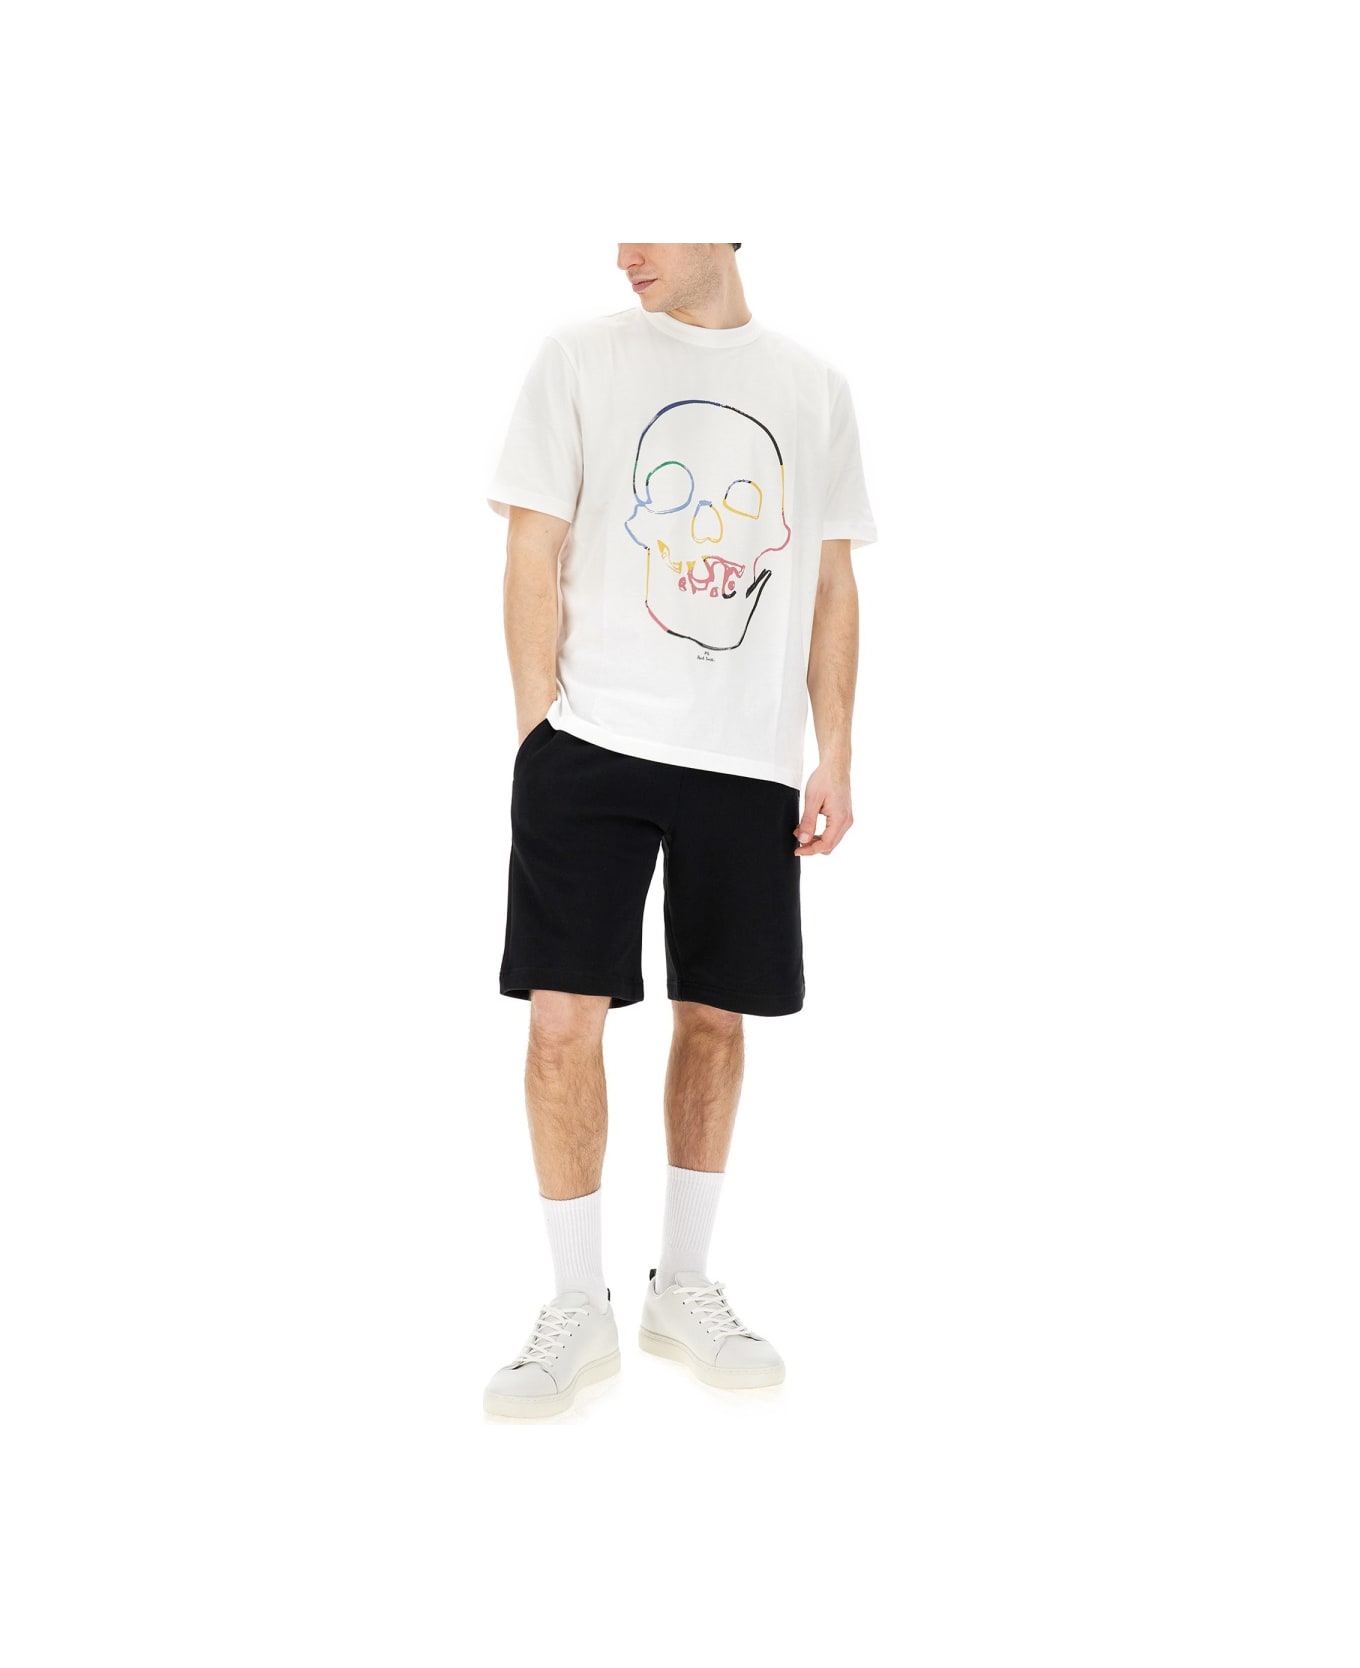 PS by Paul Smith Skull T-shirt - WHITE